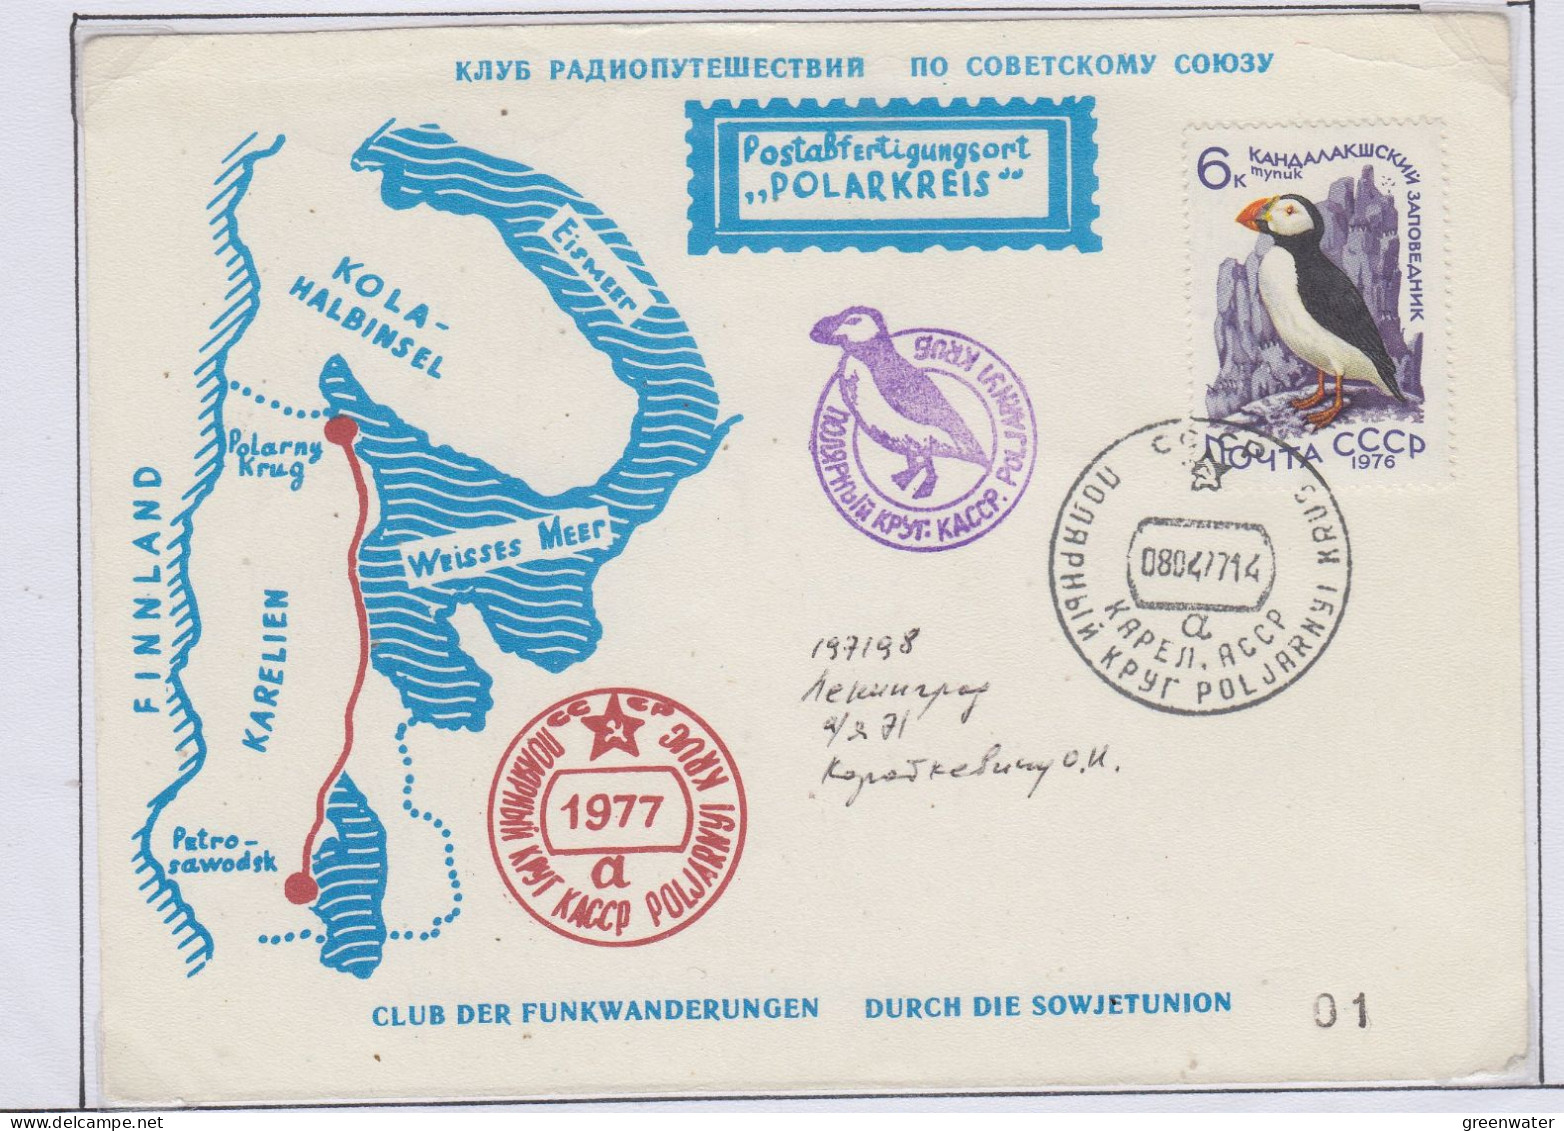 Russia 1977 Funkwanderung In Karelien  Ca 08.04.1977 (PW179) - Expéditions Arctiques